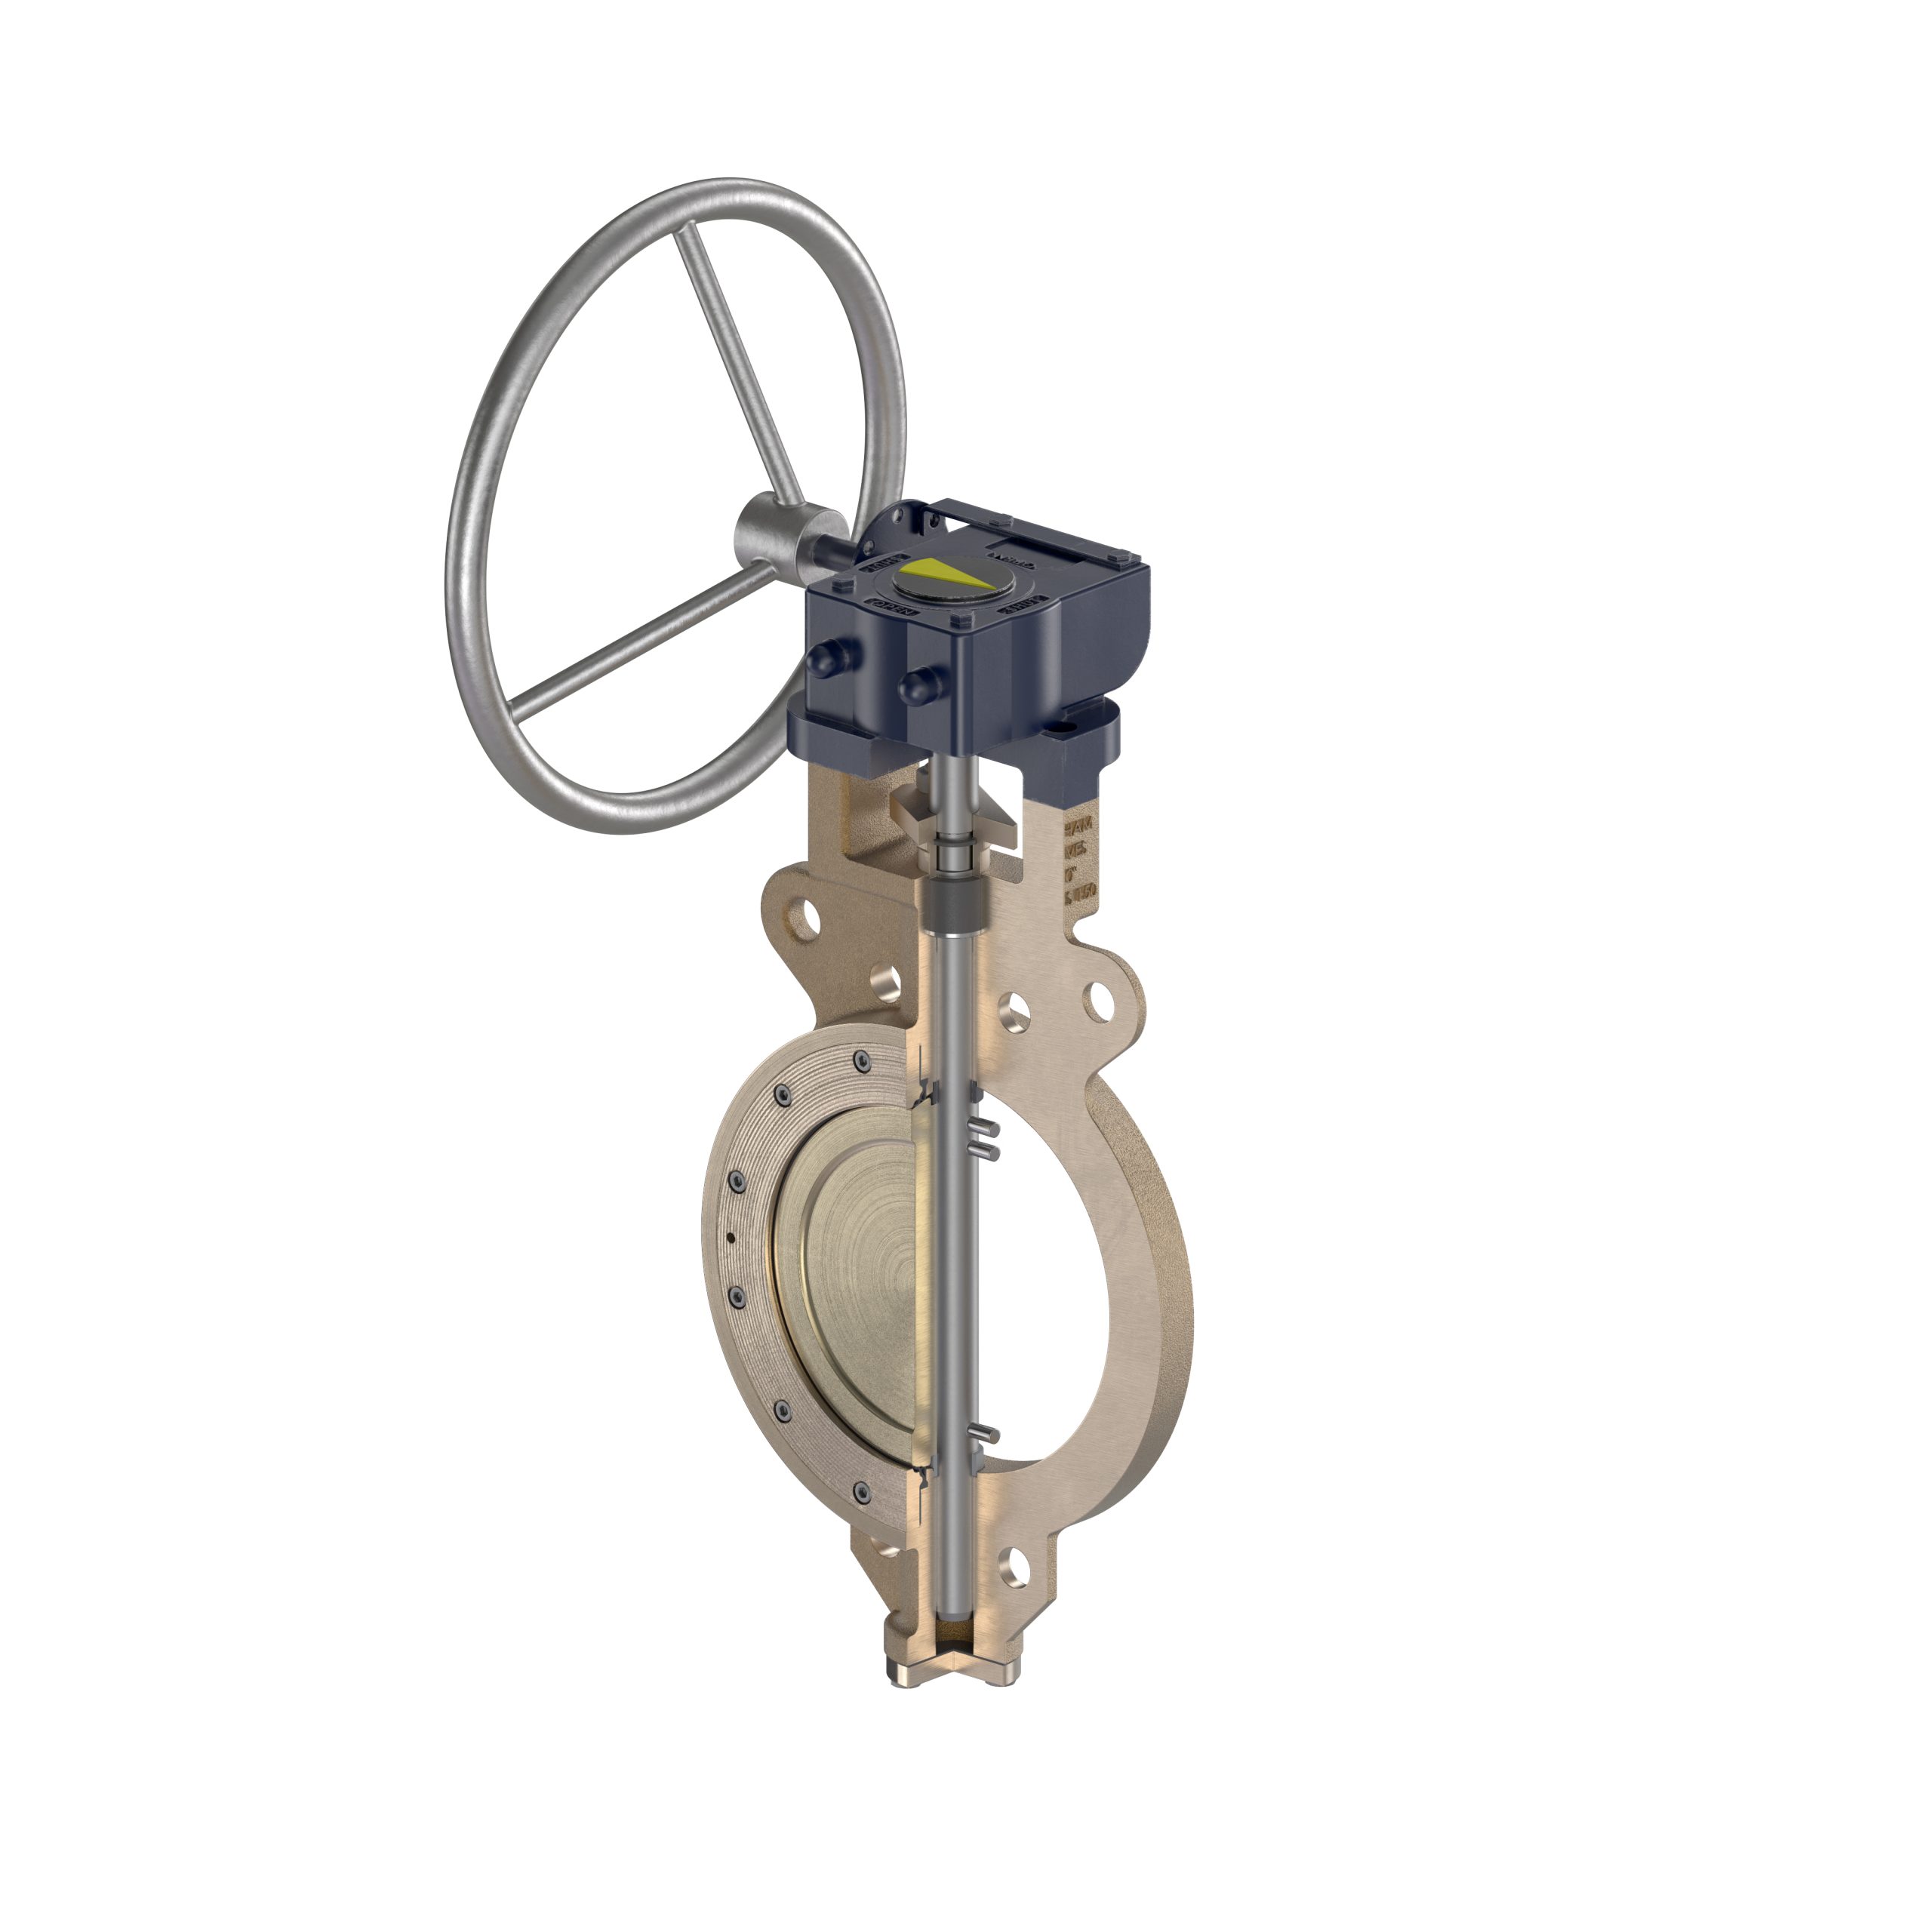 Shipham Valves Double Offset Butterfly Valve with wafer body BU01